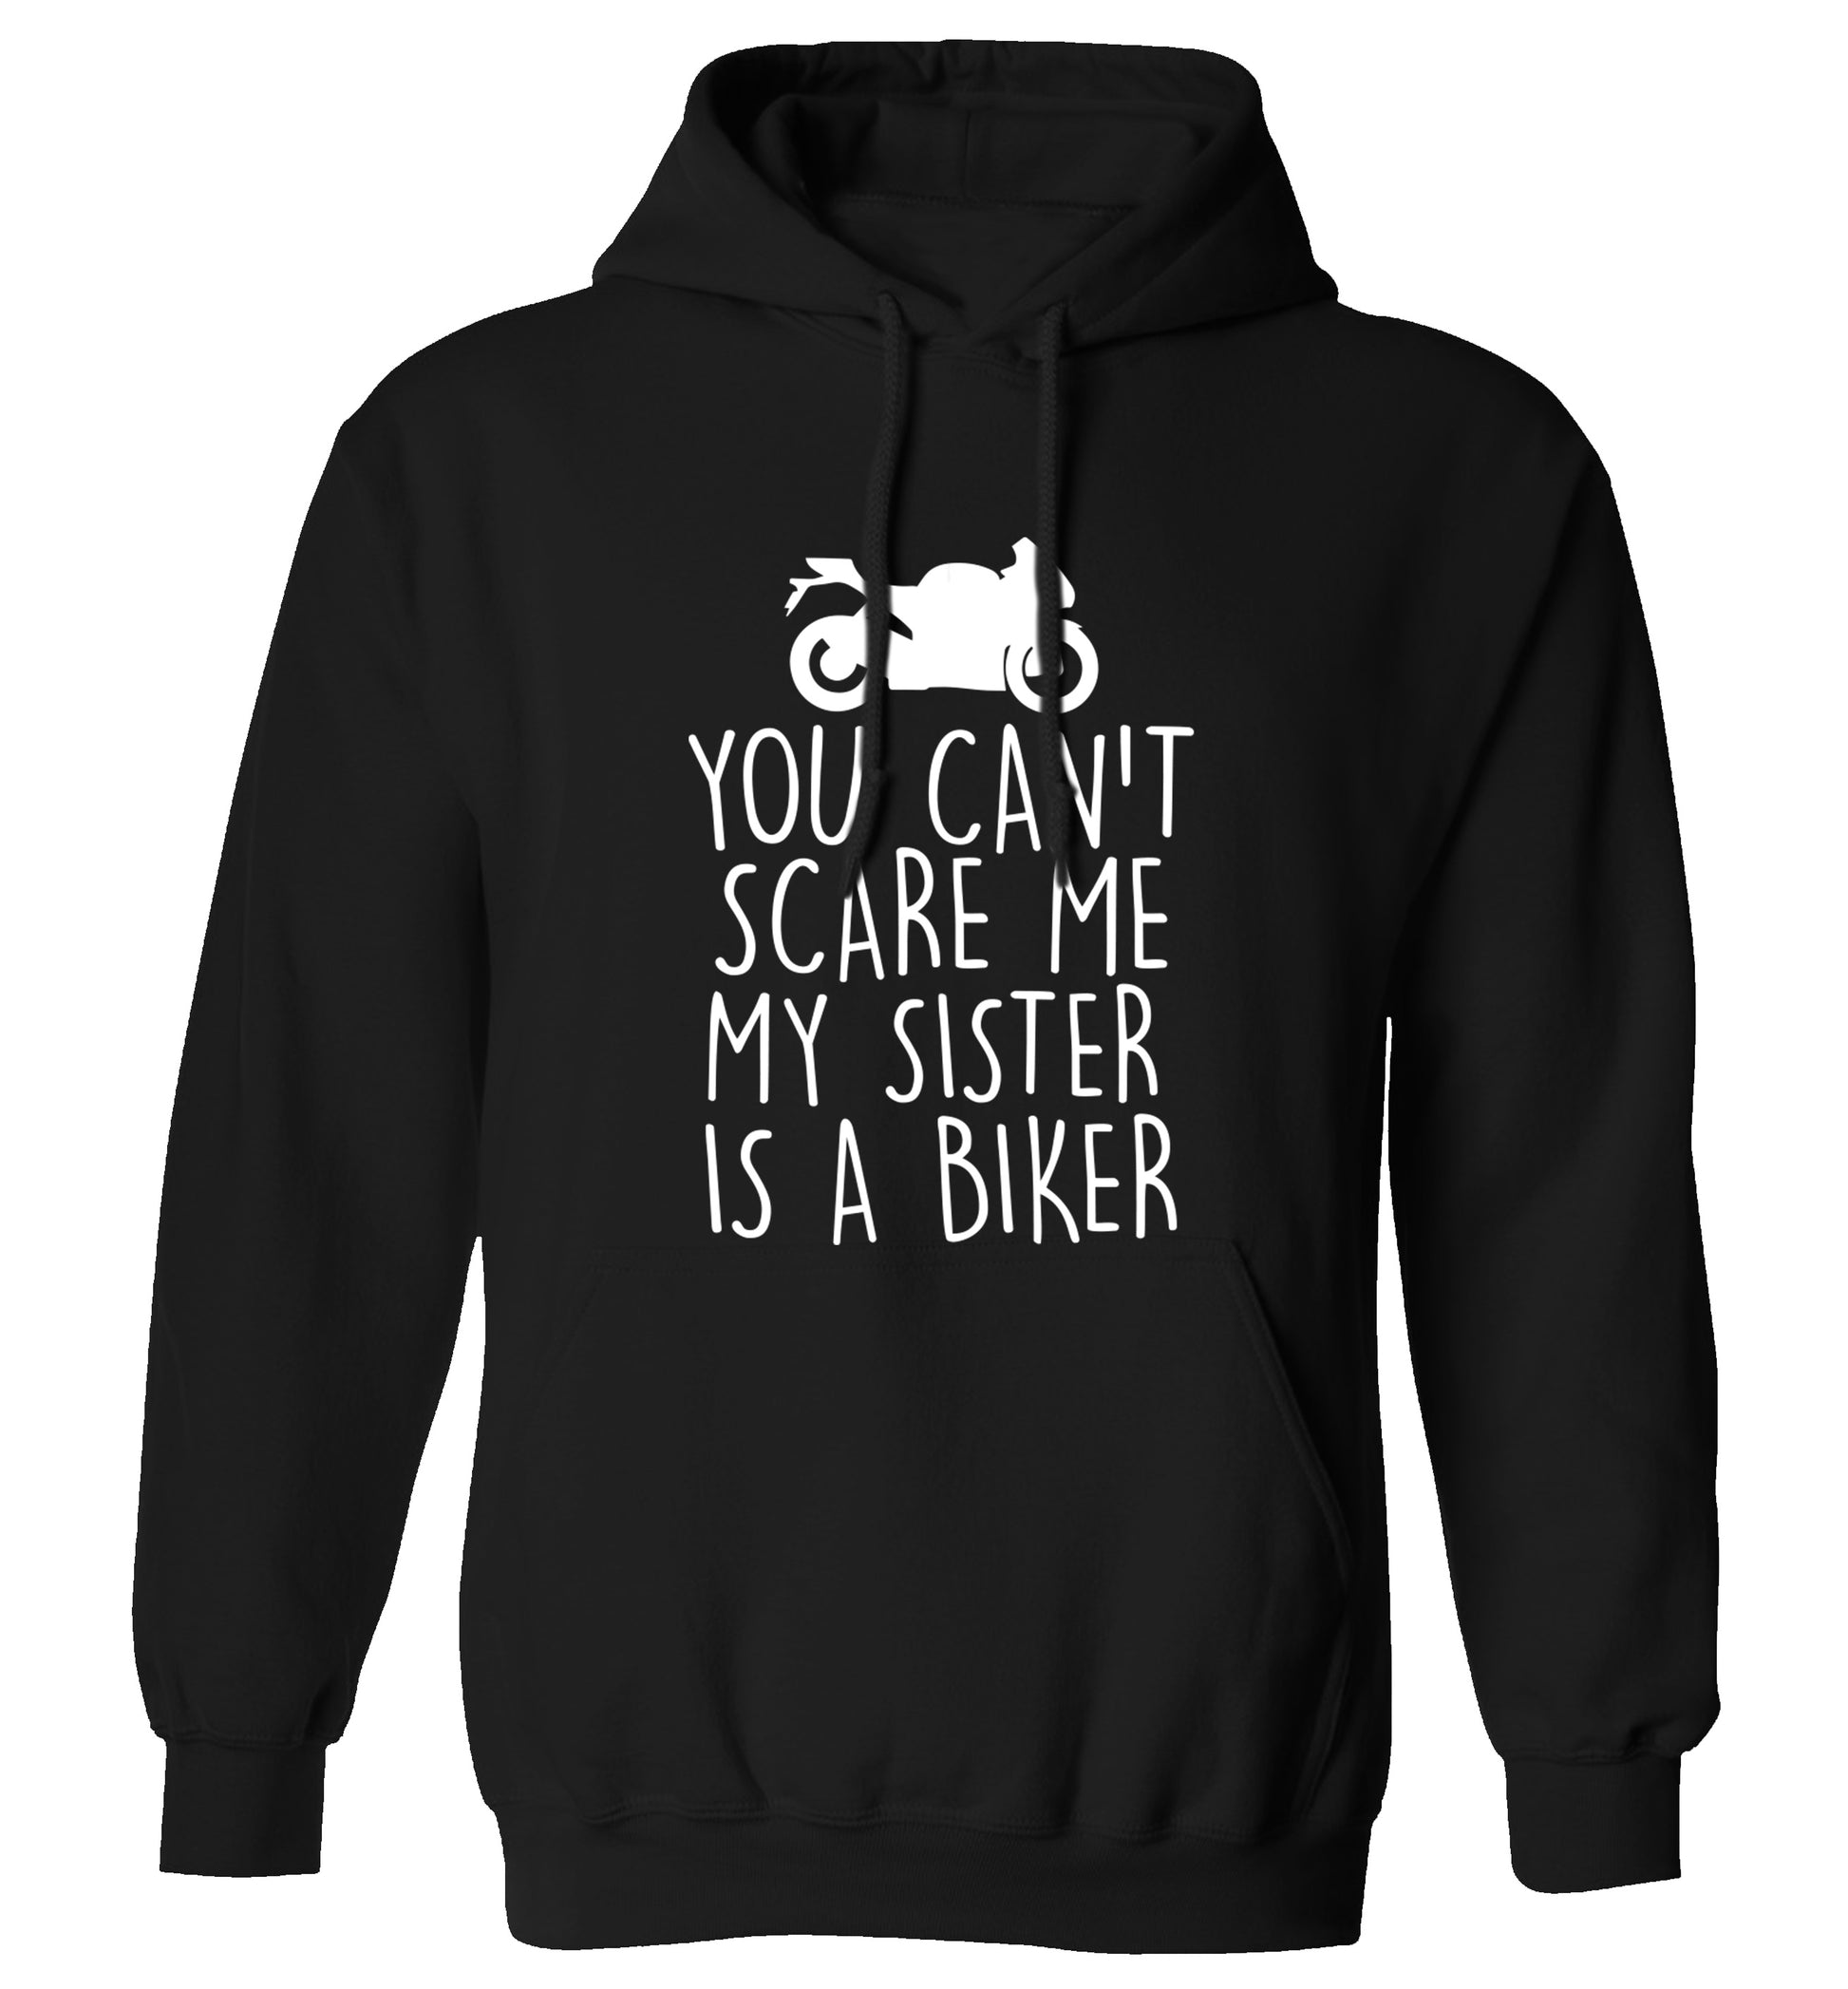 You can't scare me my sister is a biker adults unisex black hoodie 2XL